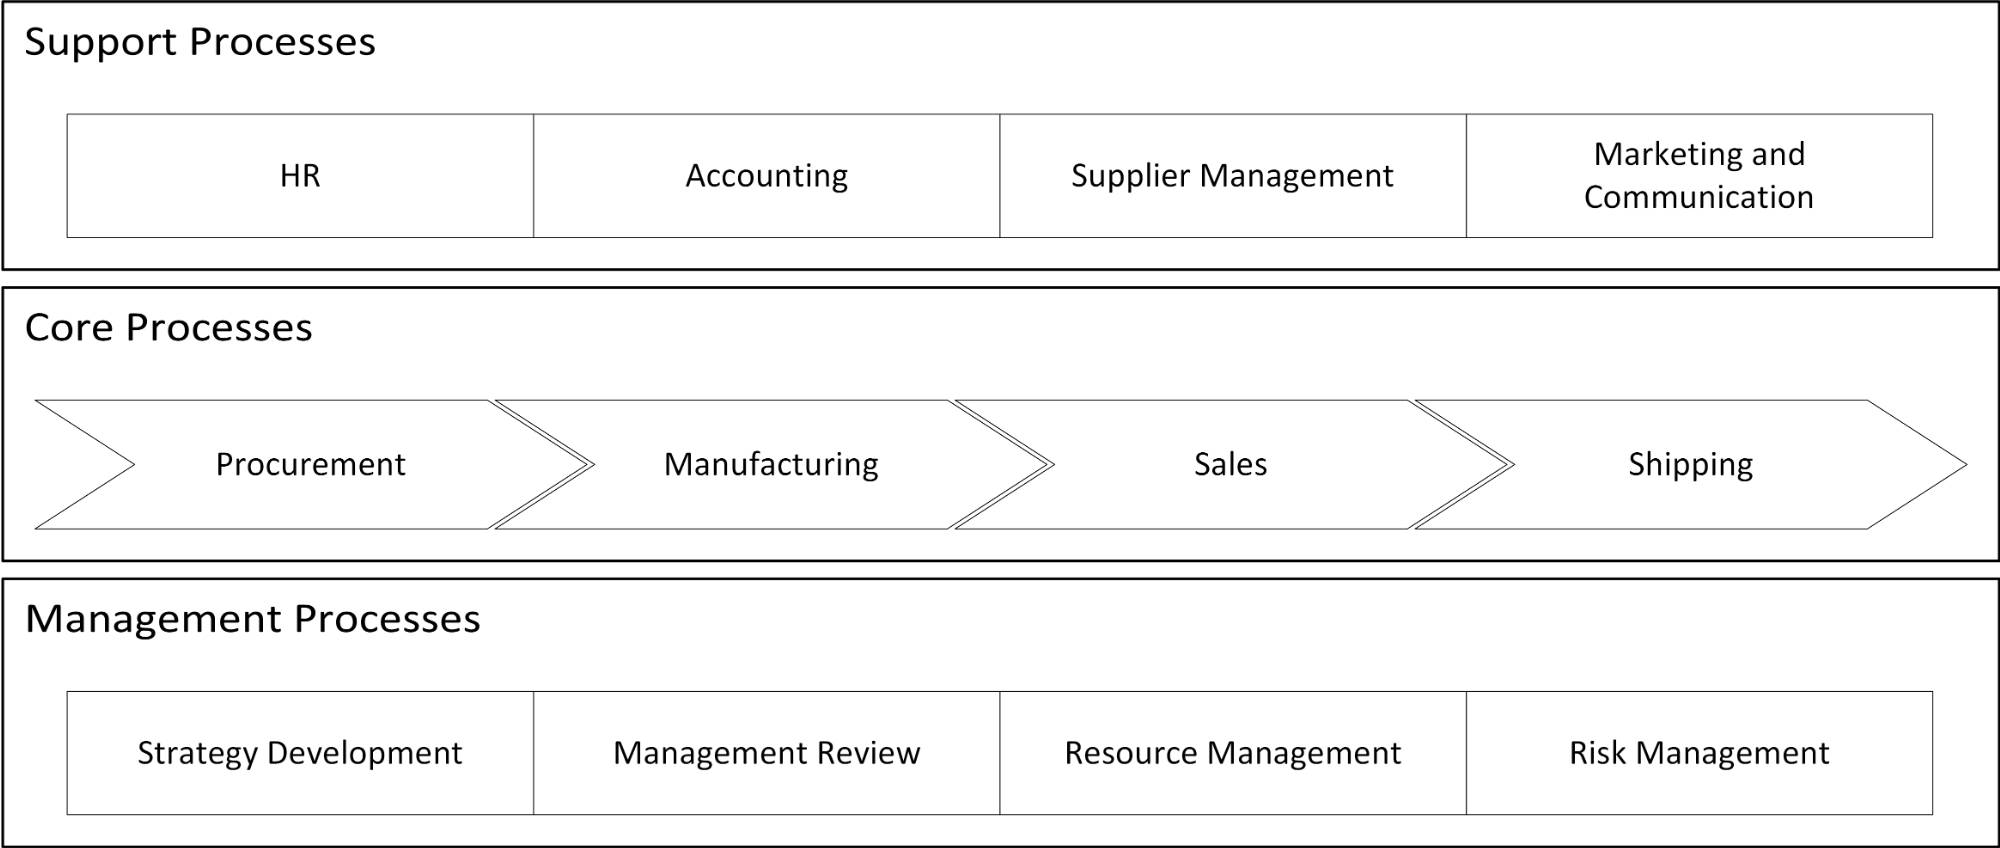 Illustration of business processes, identifying core processes